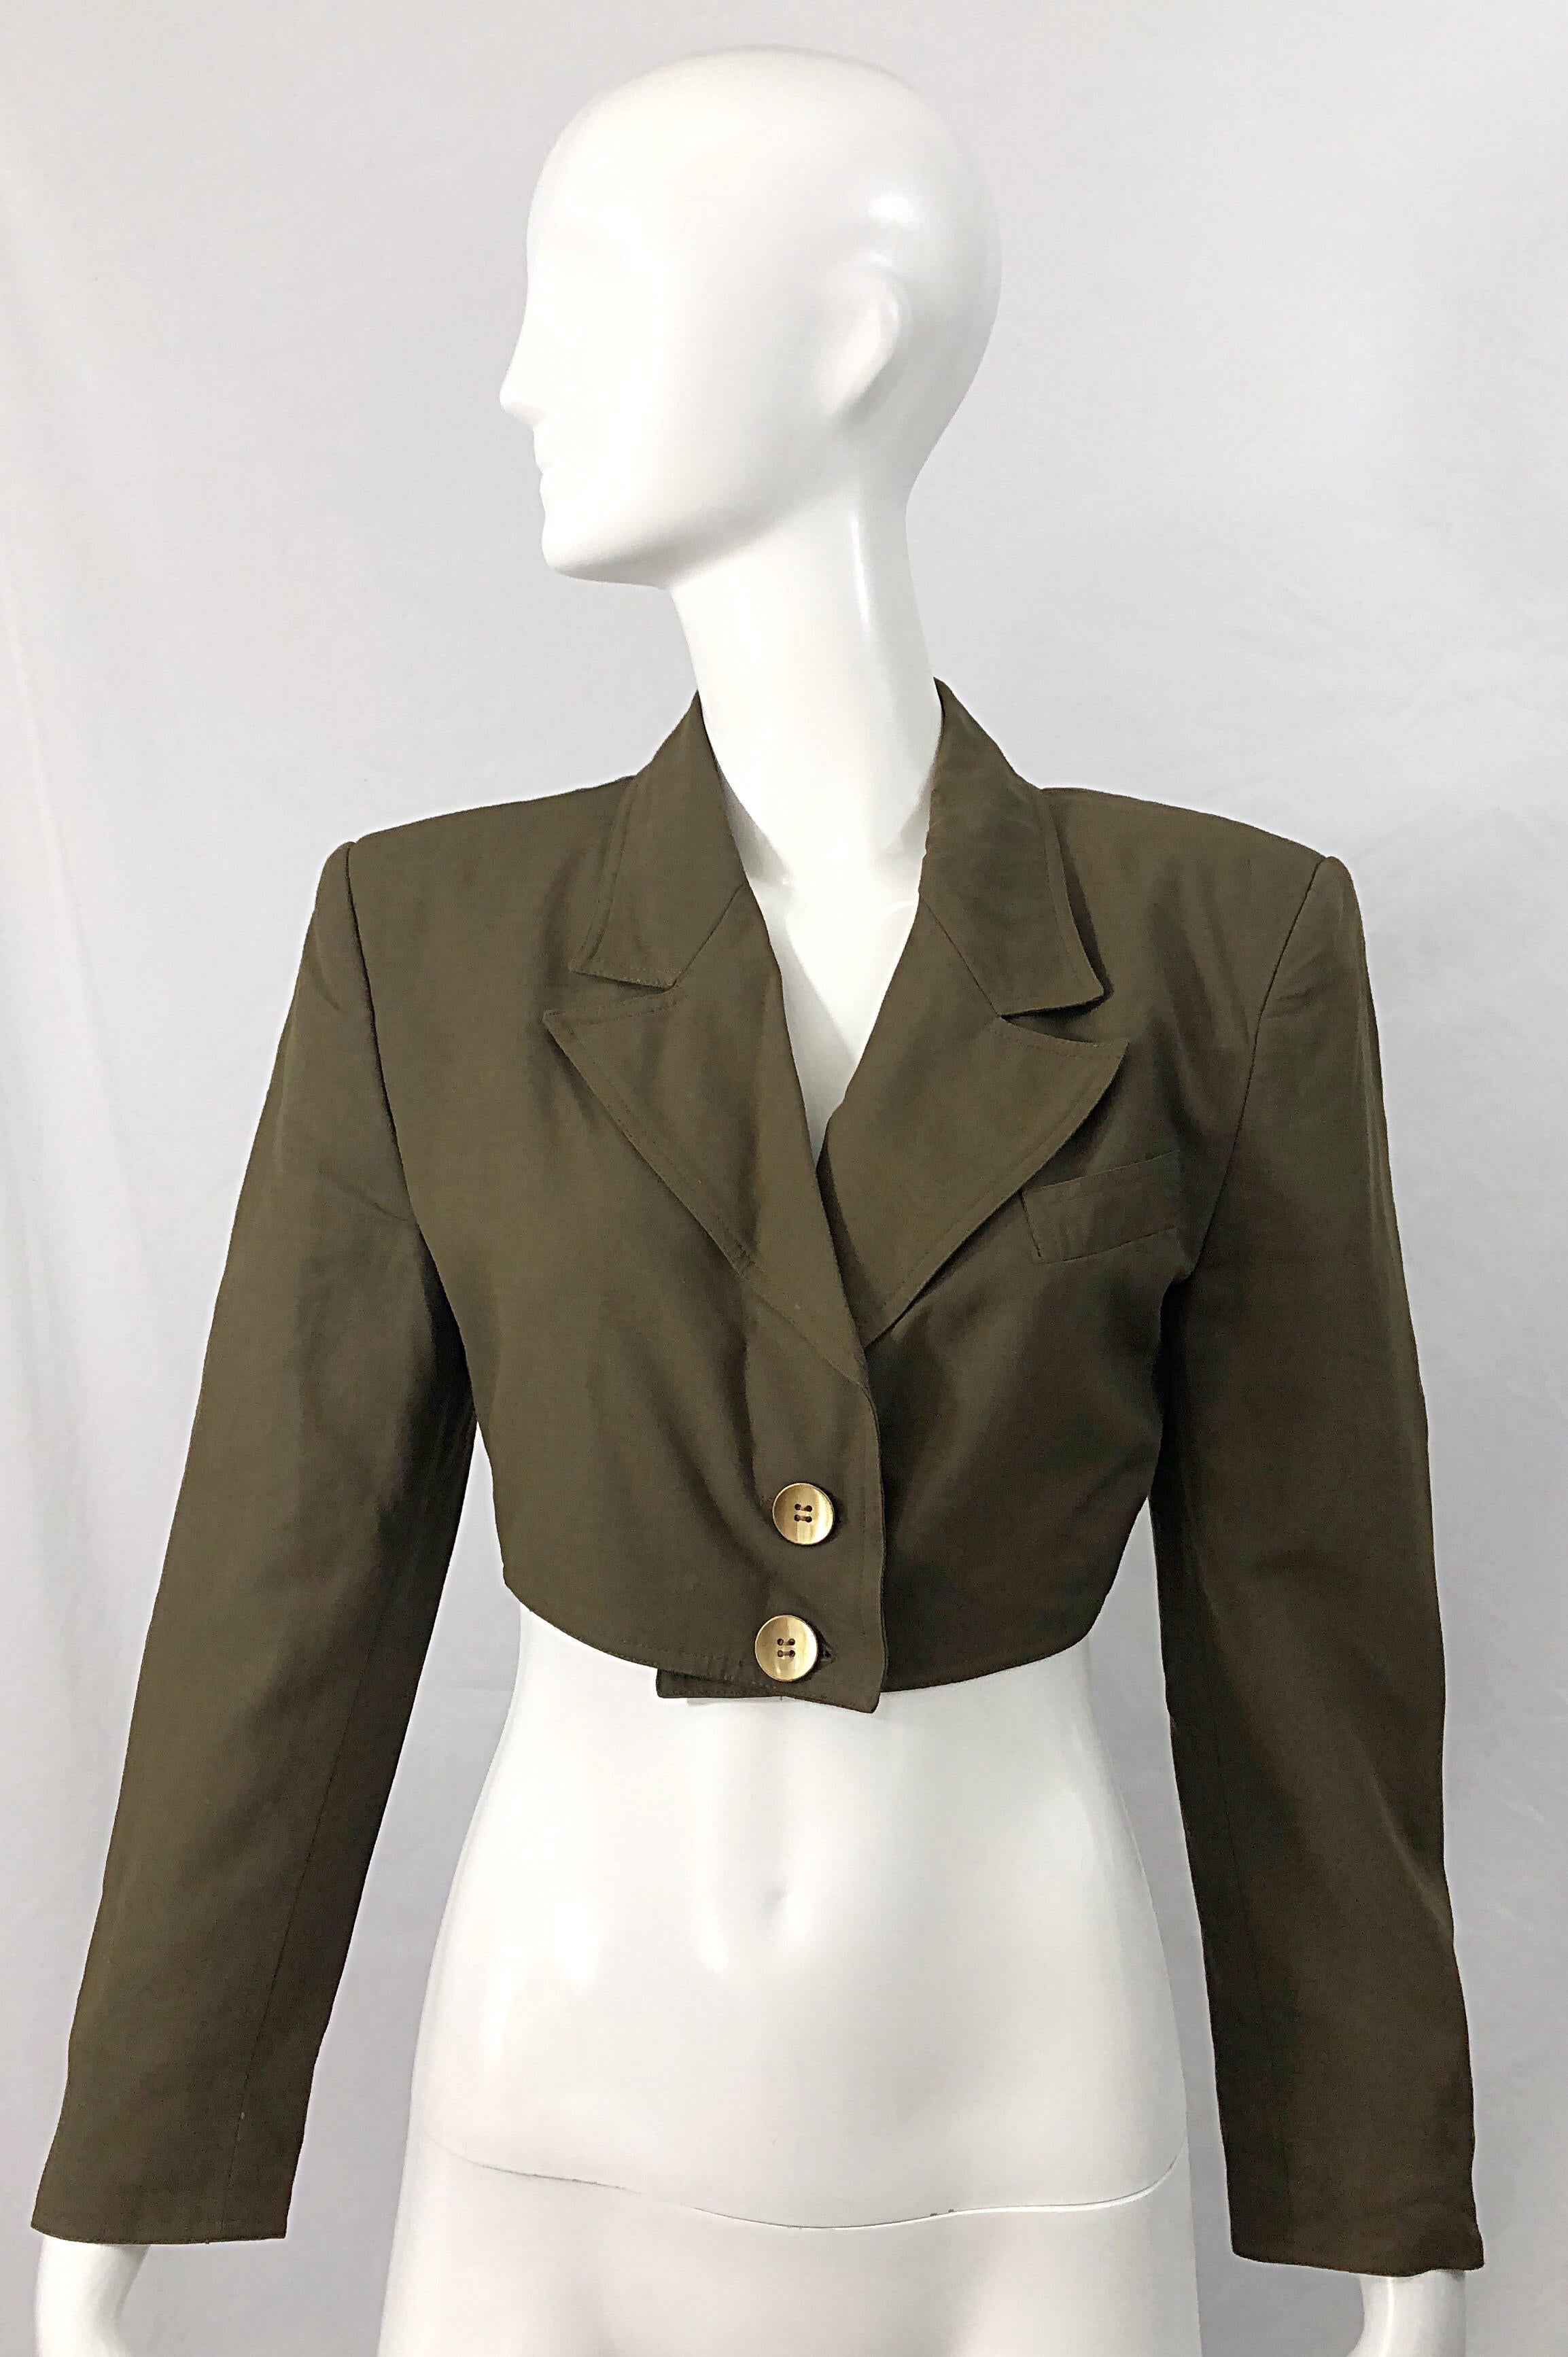 Chic 1990s ROMEO GIGLI army hunter green rayon and wool cropped blazer jacket ! The perfect army green color will match everything, and is perfect all year. Lightweight soft fabric. Great layered or alone. Fully lined.
60% Rayon
40% Wool
In great